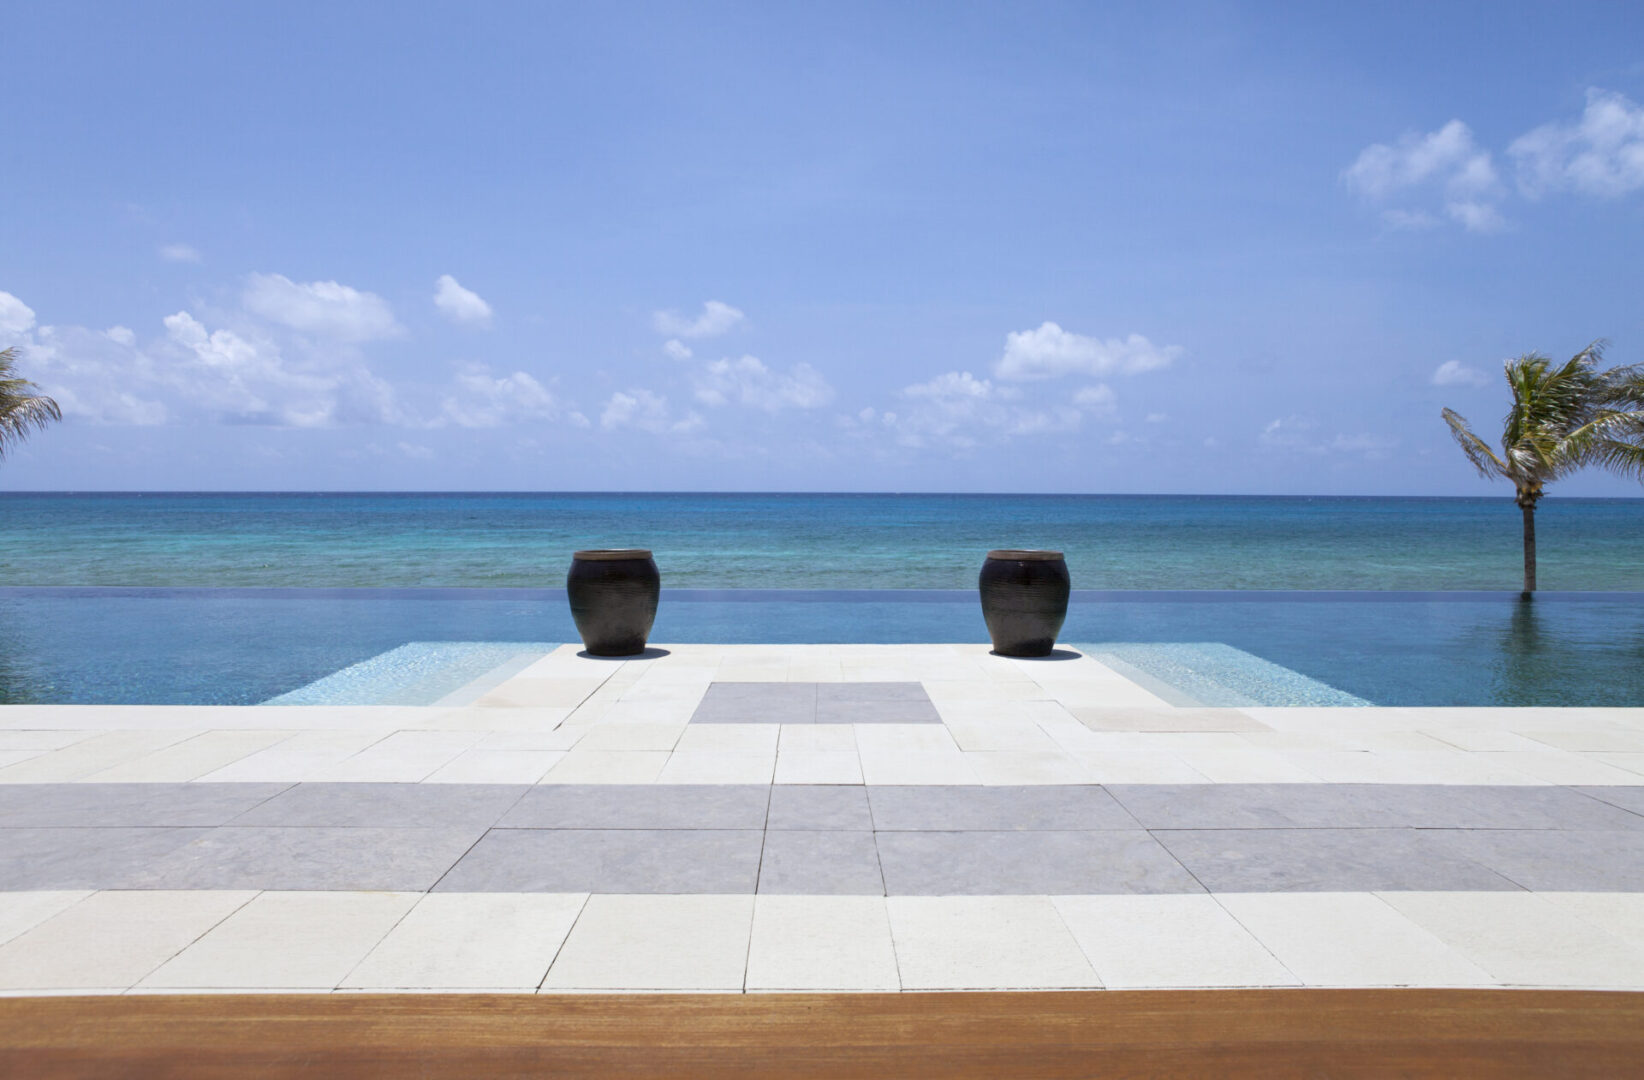 Architecture Photography of the Nandana Property at West End, Bahamas.